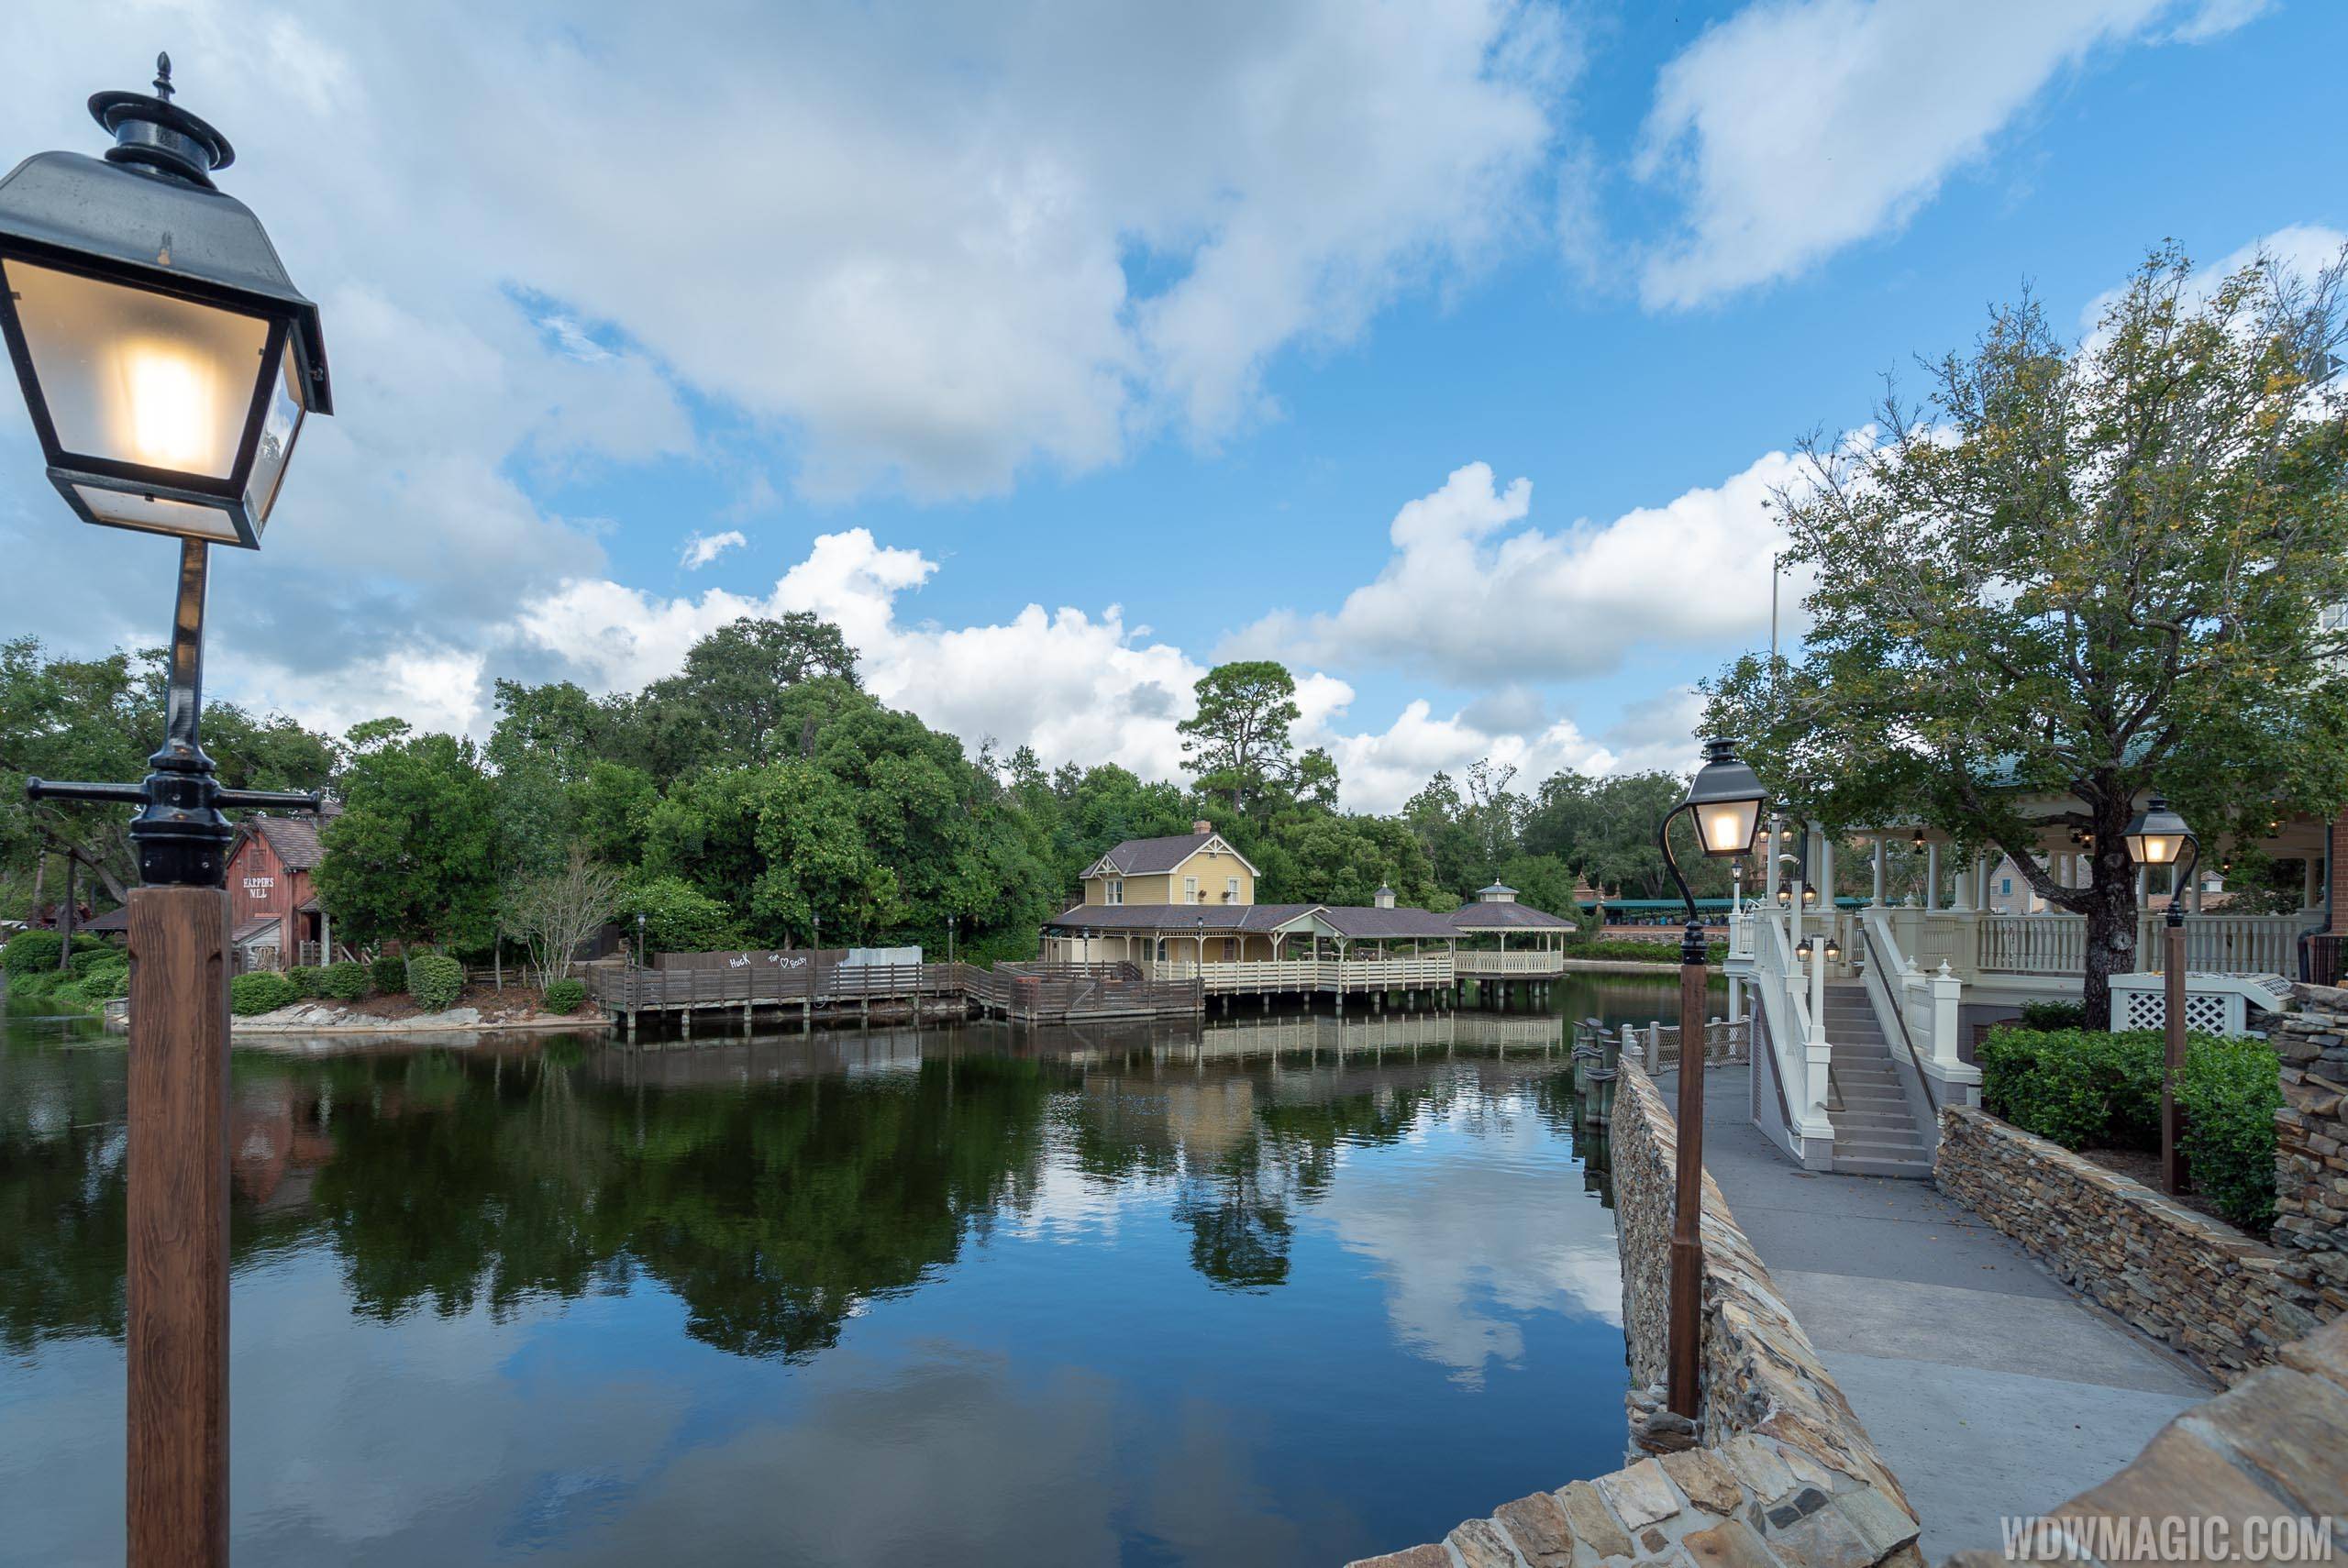 Rivers of America refilled after refurbishment